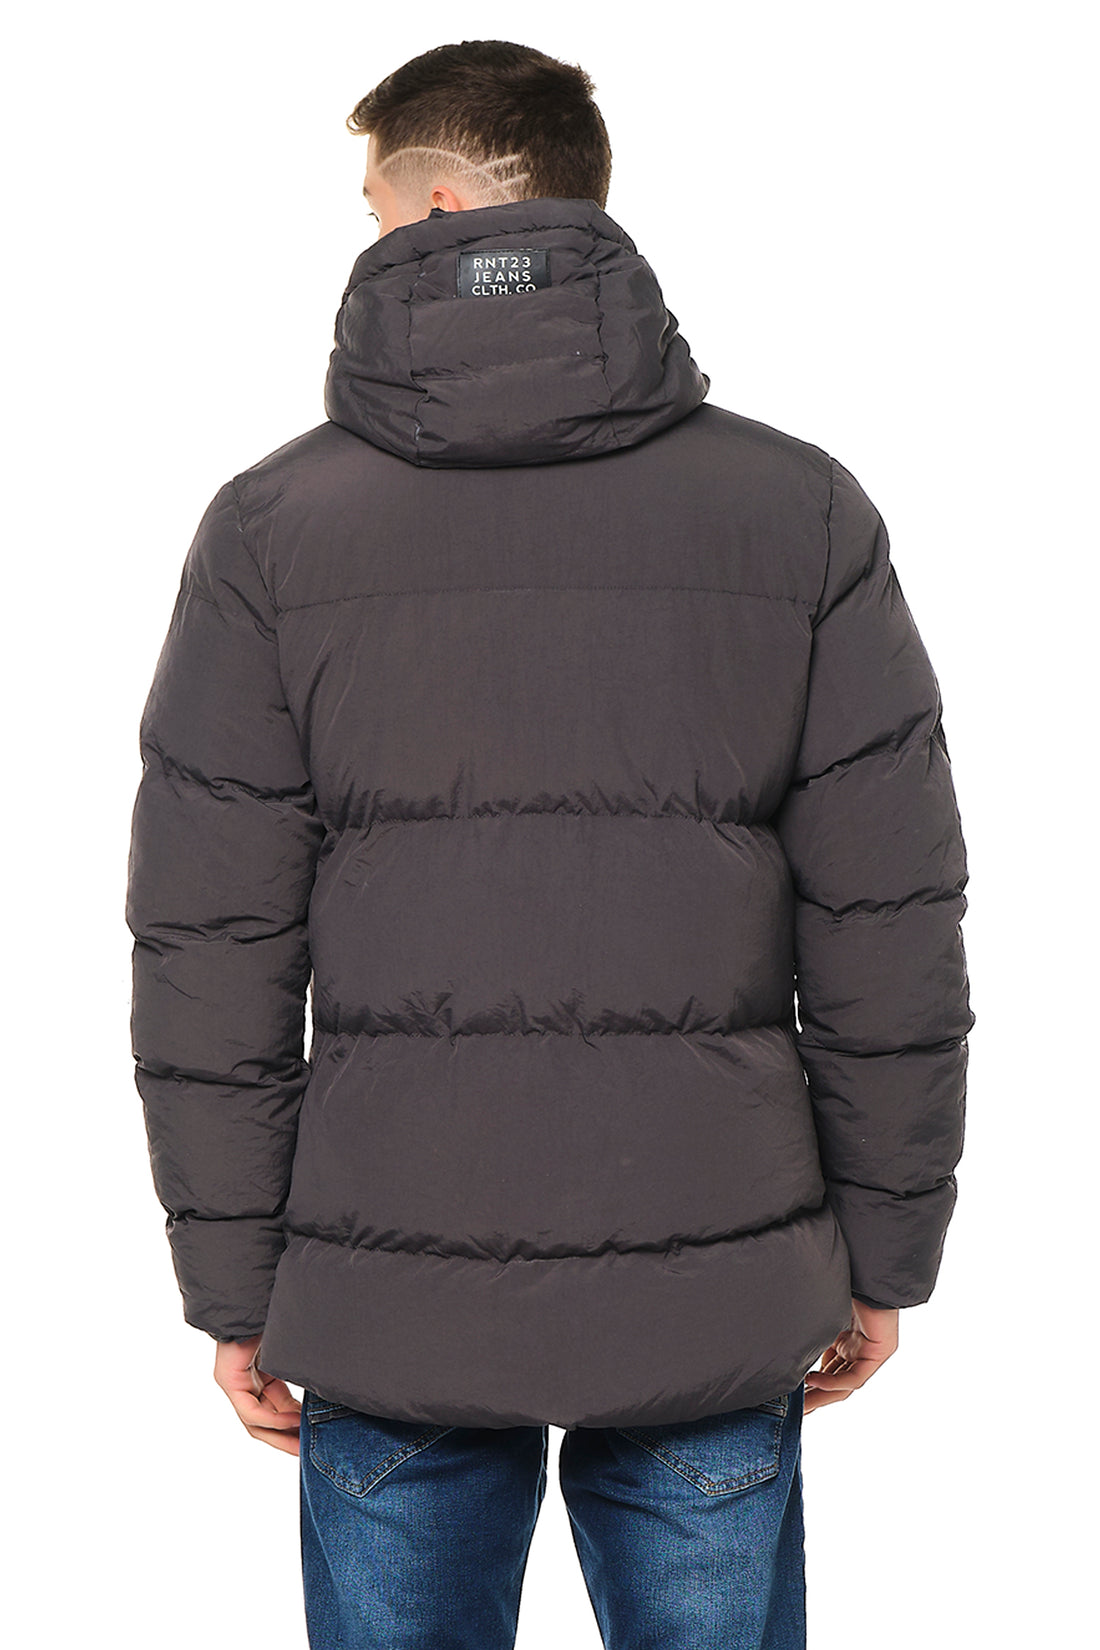 HOODED PADDED COAT - ANTHRACITE - Ron Tomson